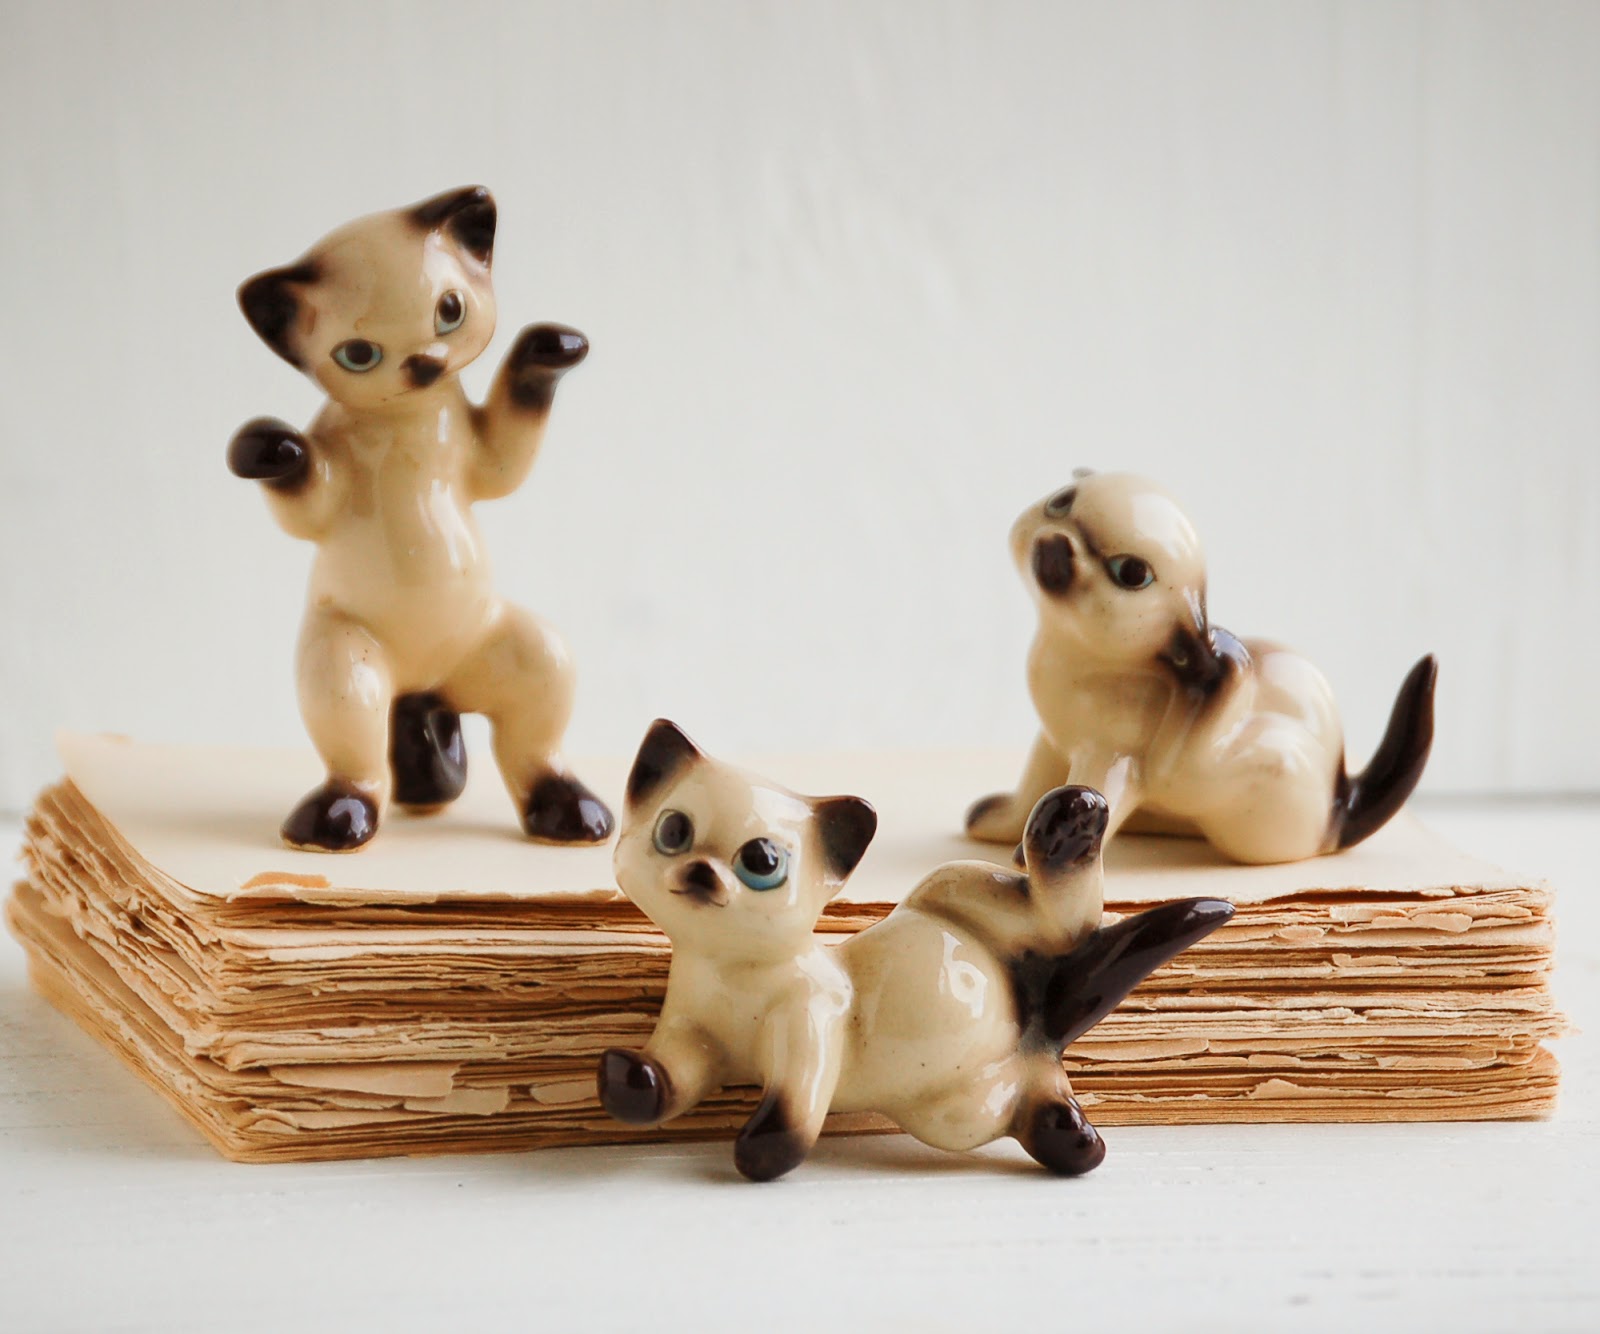 https://www.etsy.com/listing/186877394/vintage-siamese-kittens-siamese-cat?ref=shop_home_active_7